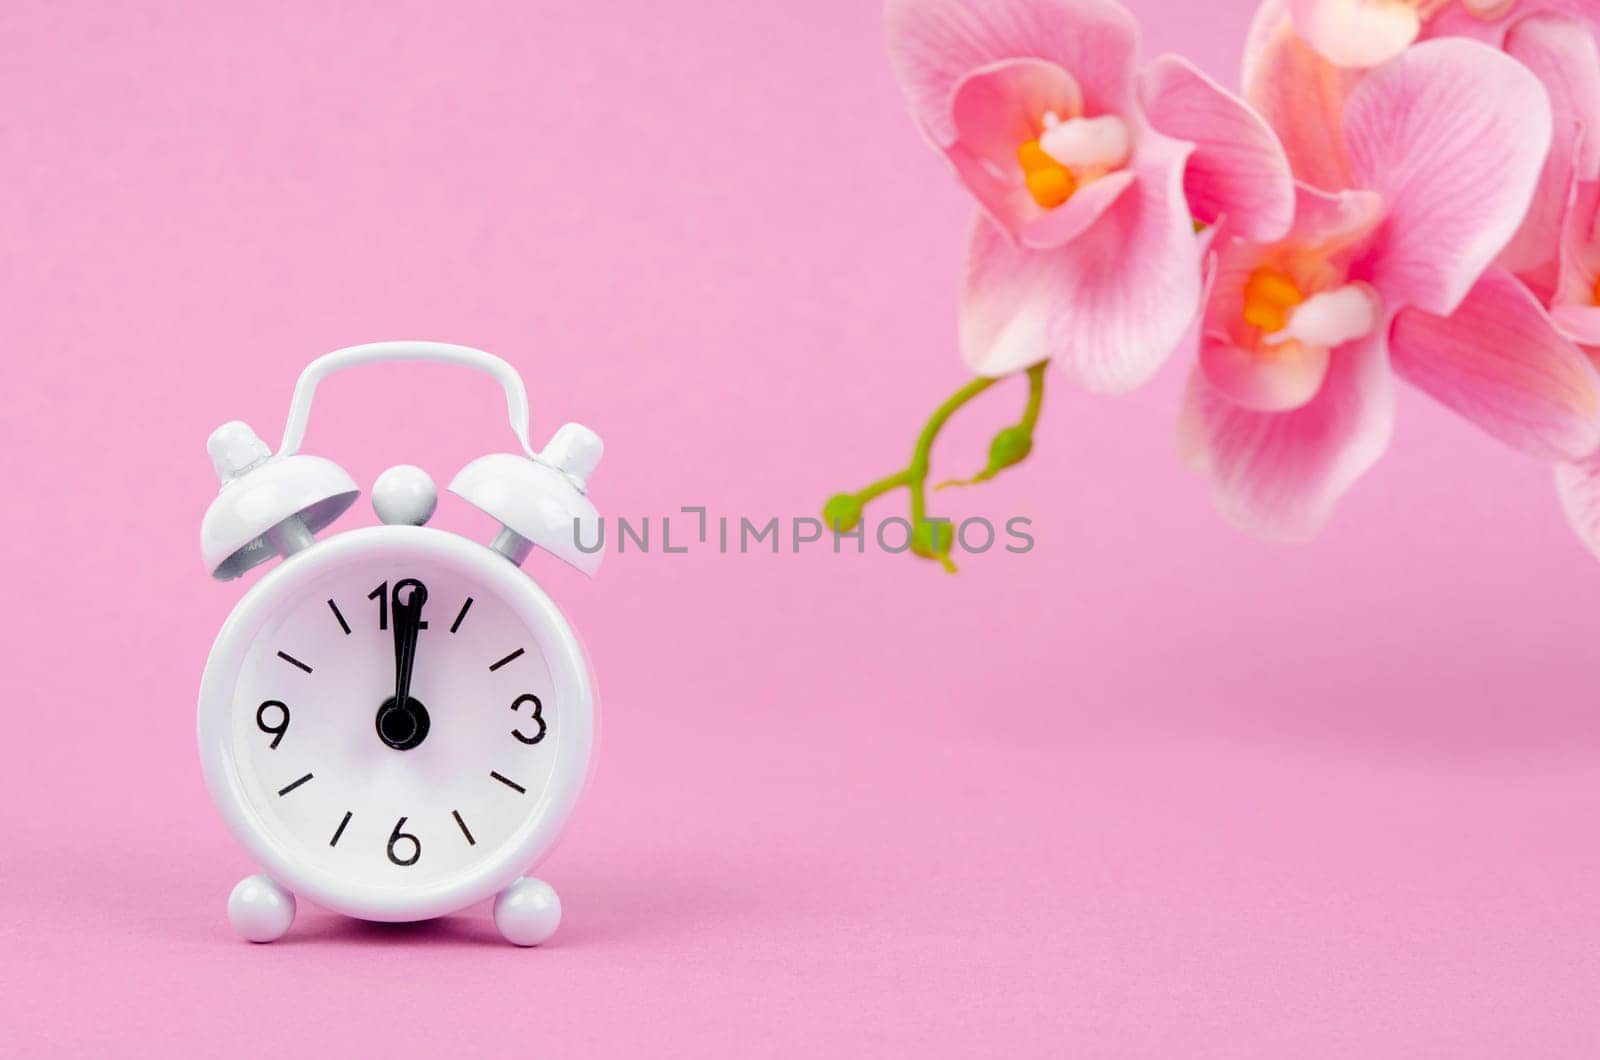 The White alarm clock and pink streaked orchid flower on sweet background. by Gamjai